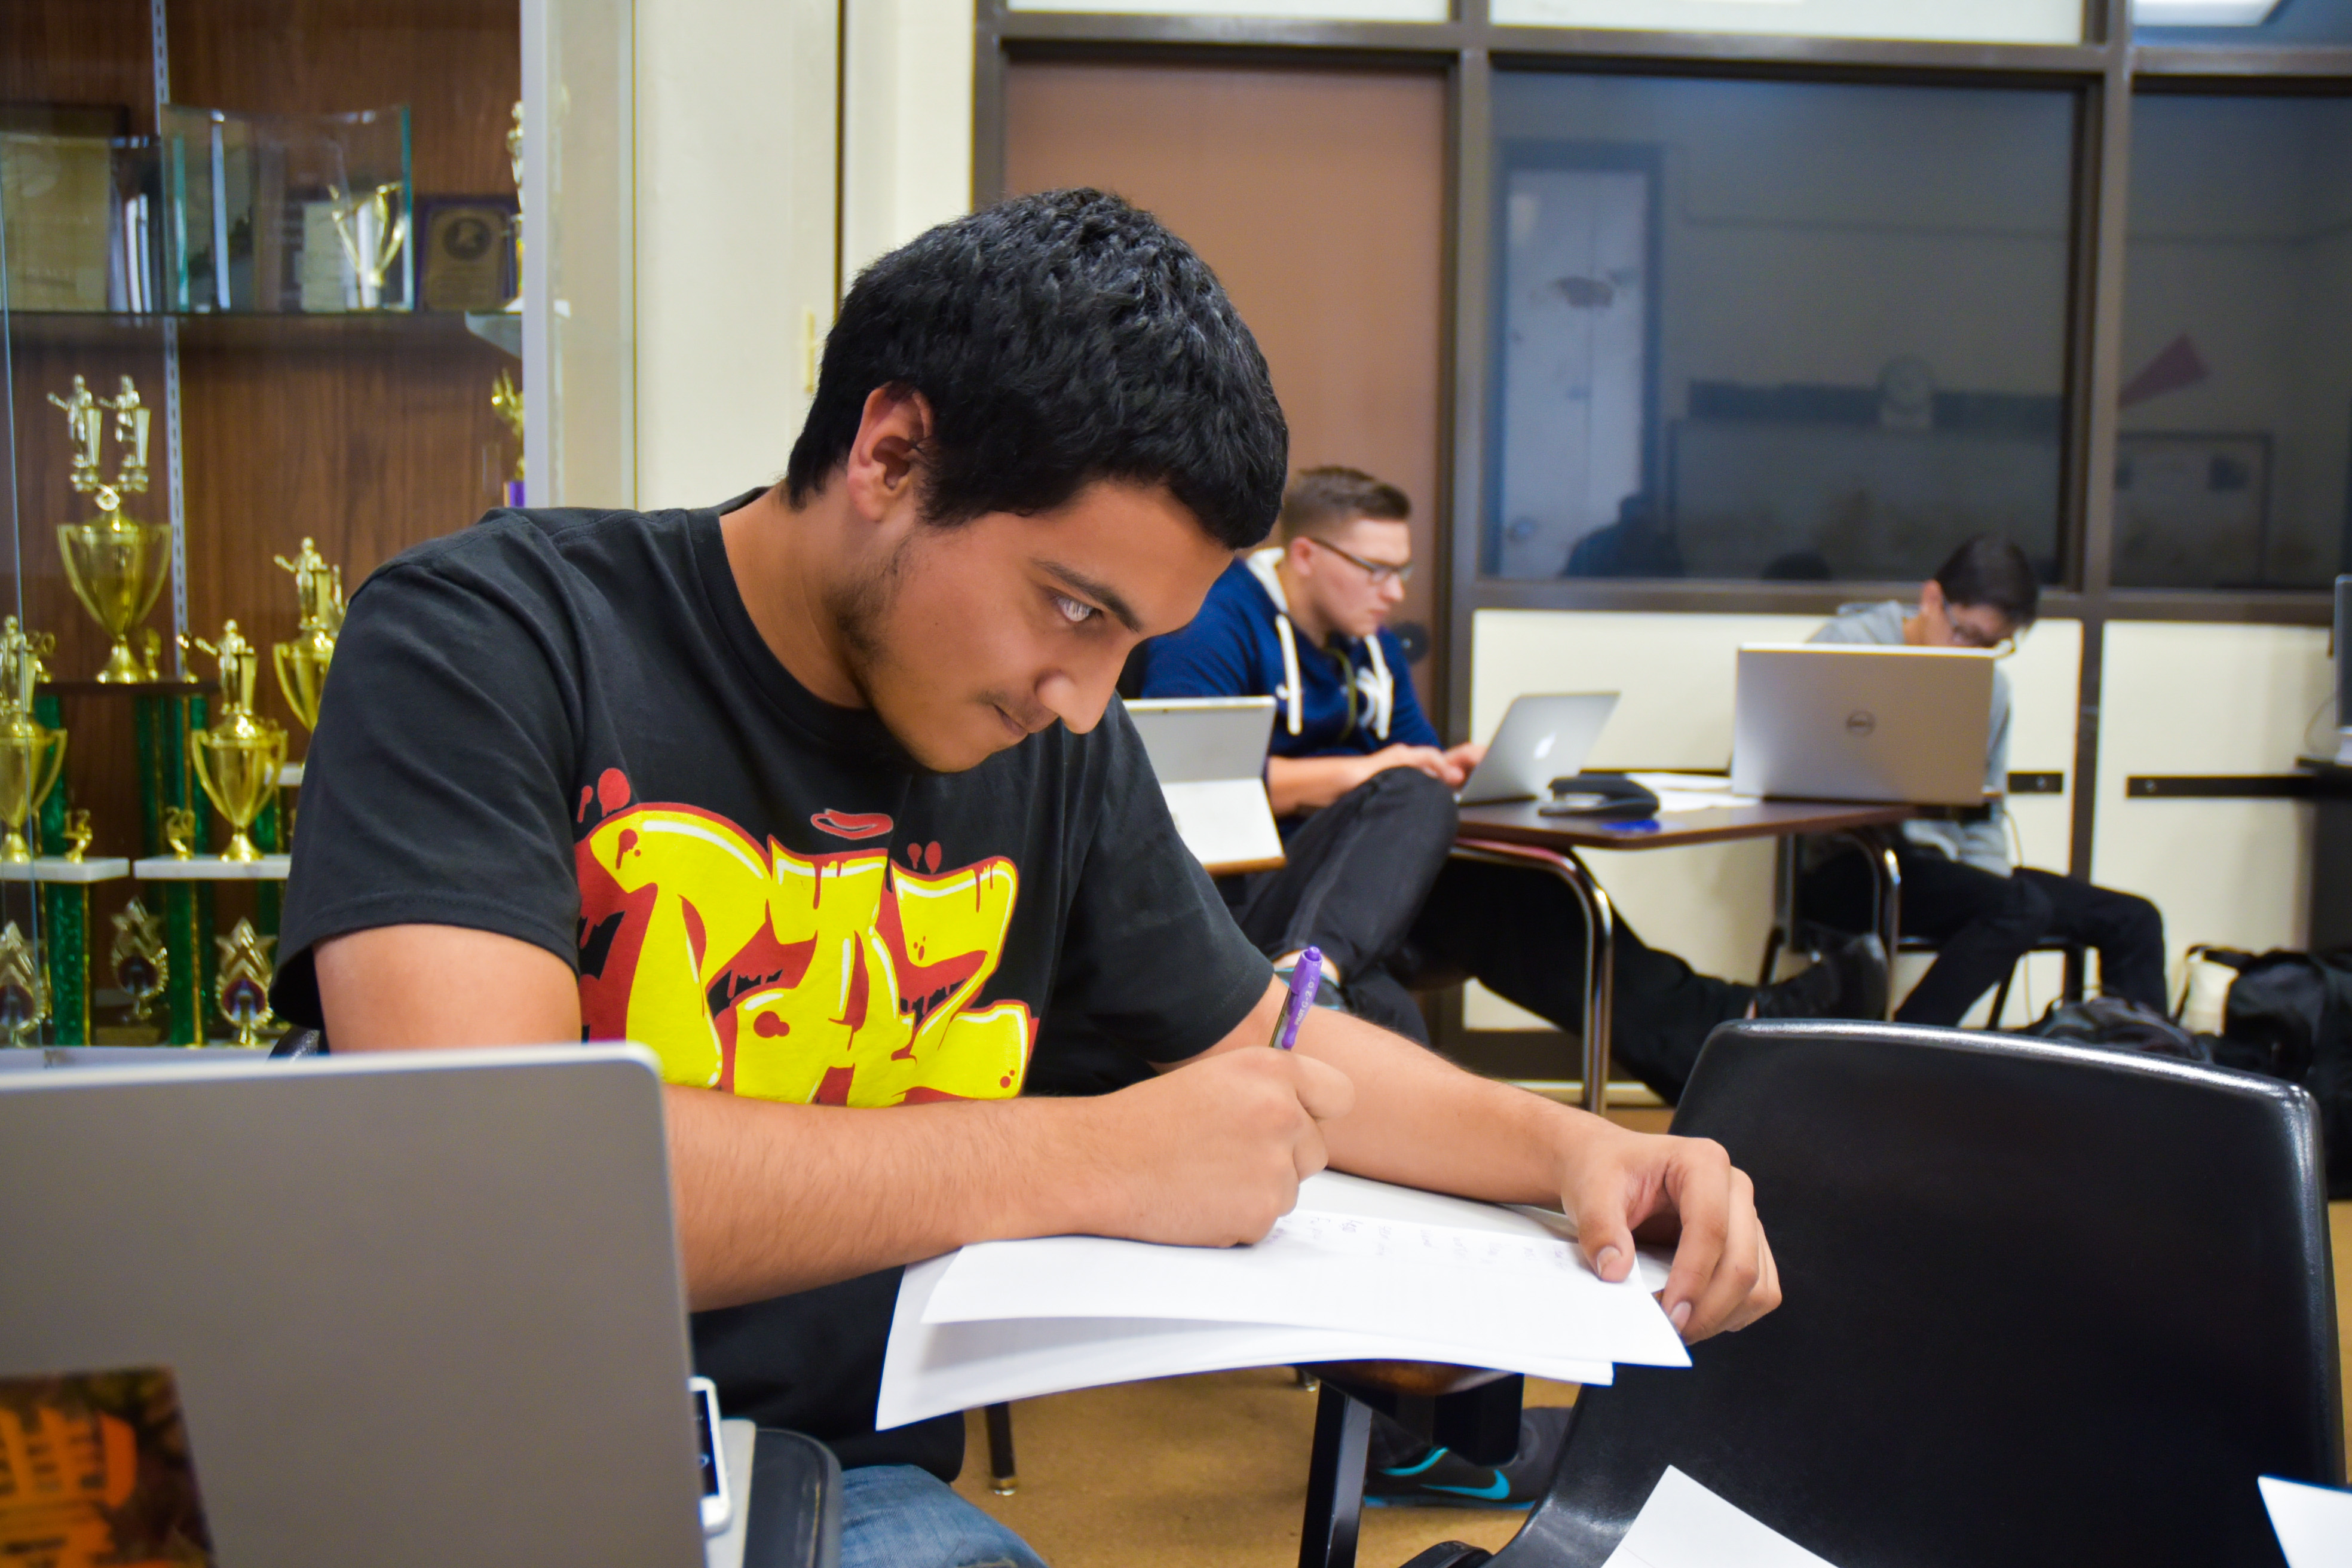 San Joaquin Delta College speech and debate team member Peter Perez jots down notes during his 20 minutes of prep time during a practice last week.